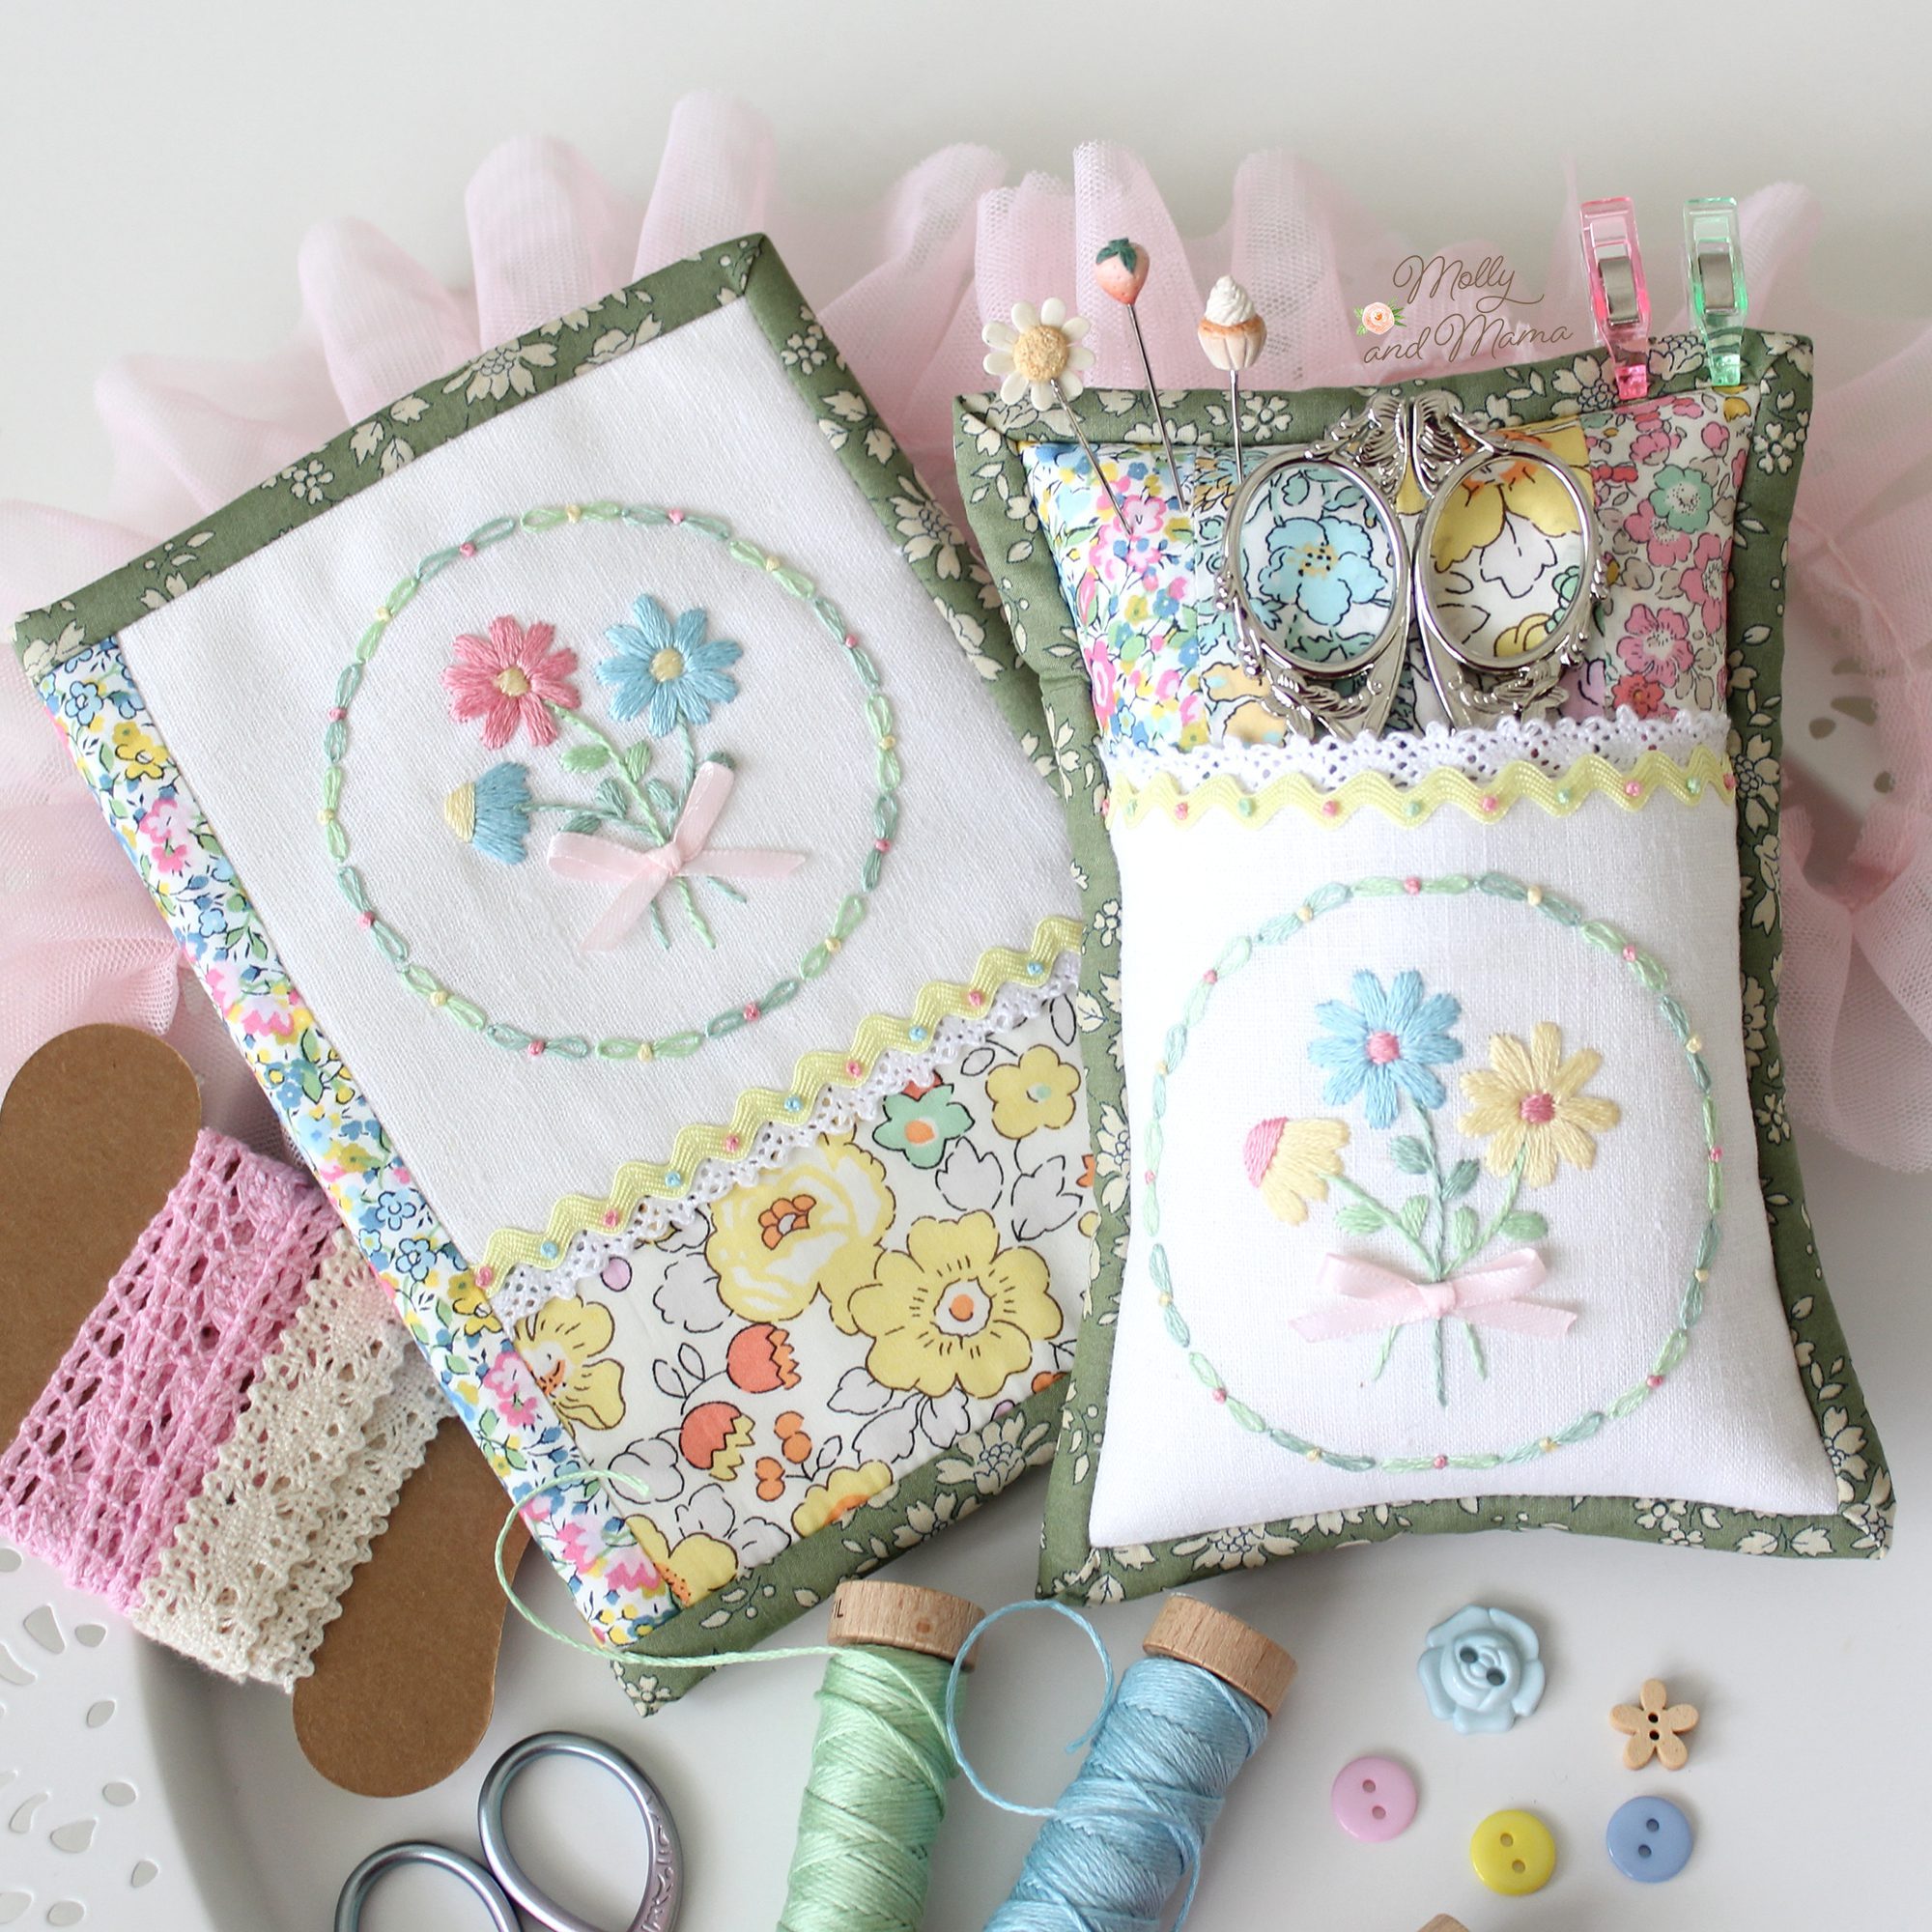 Introducing the Posy Pocket Pin Cushion and Needle Book